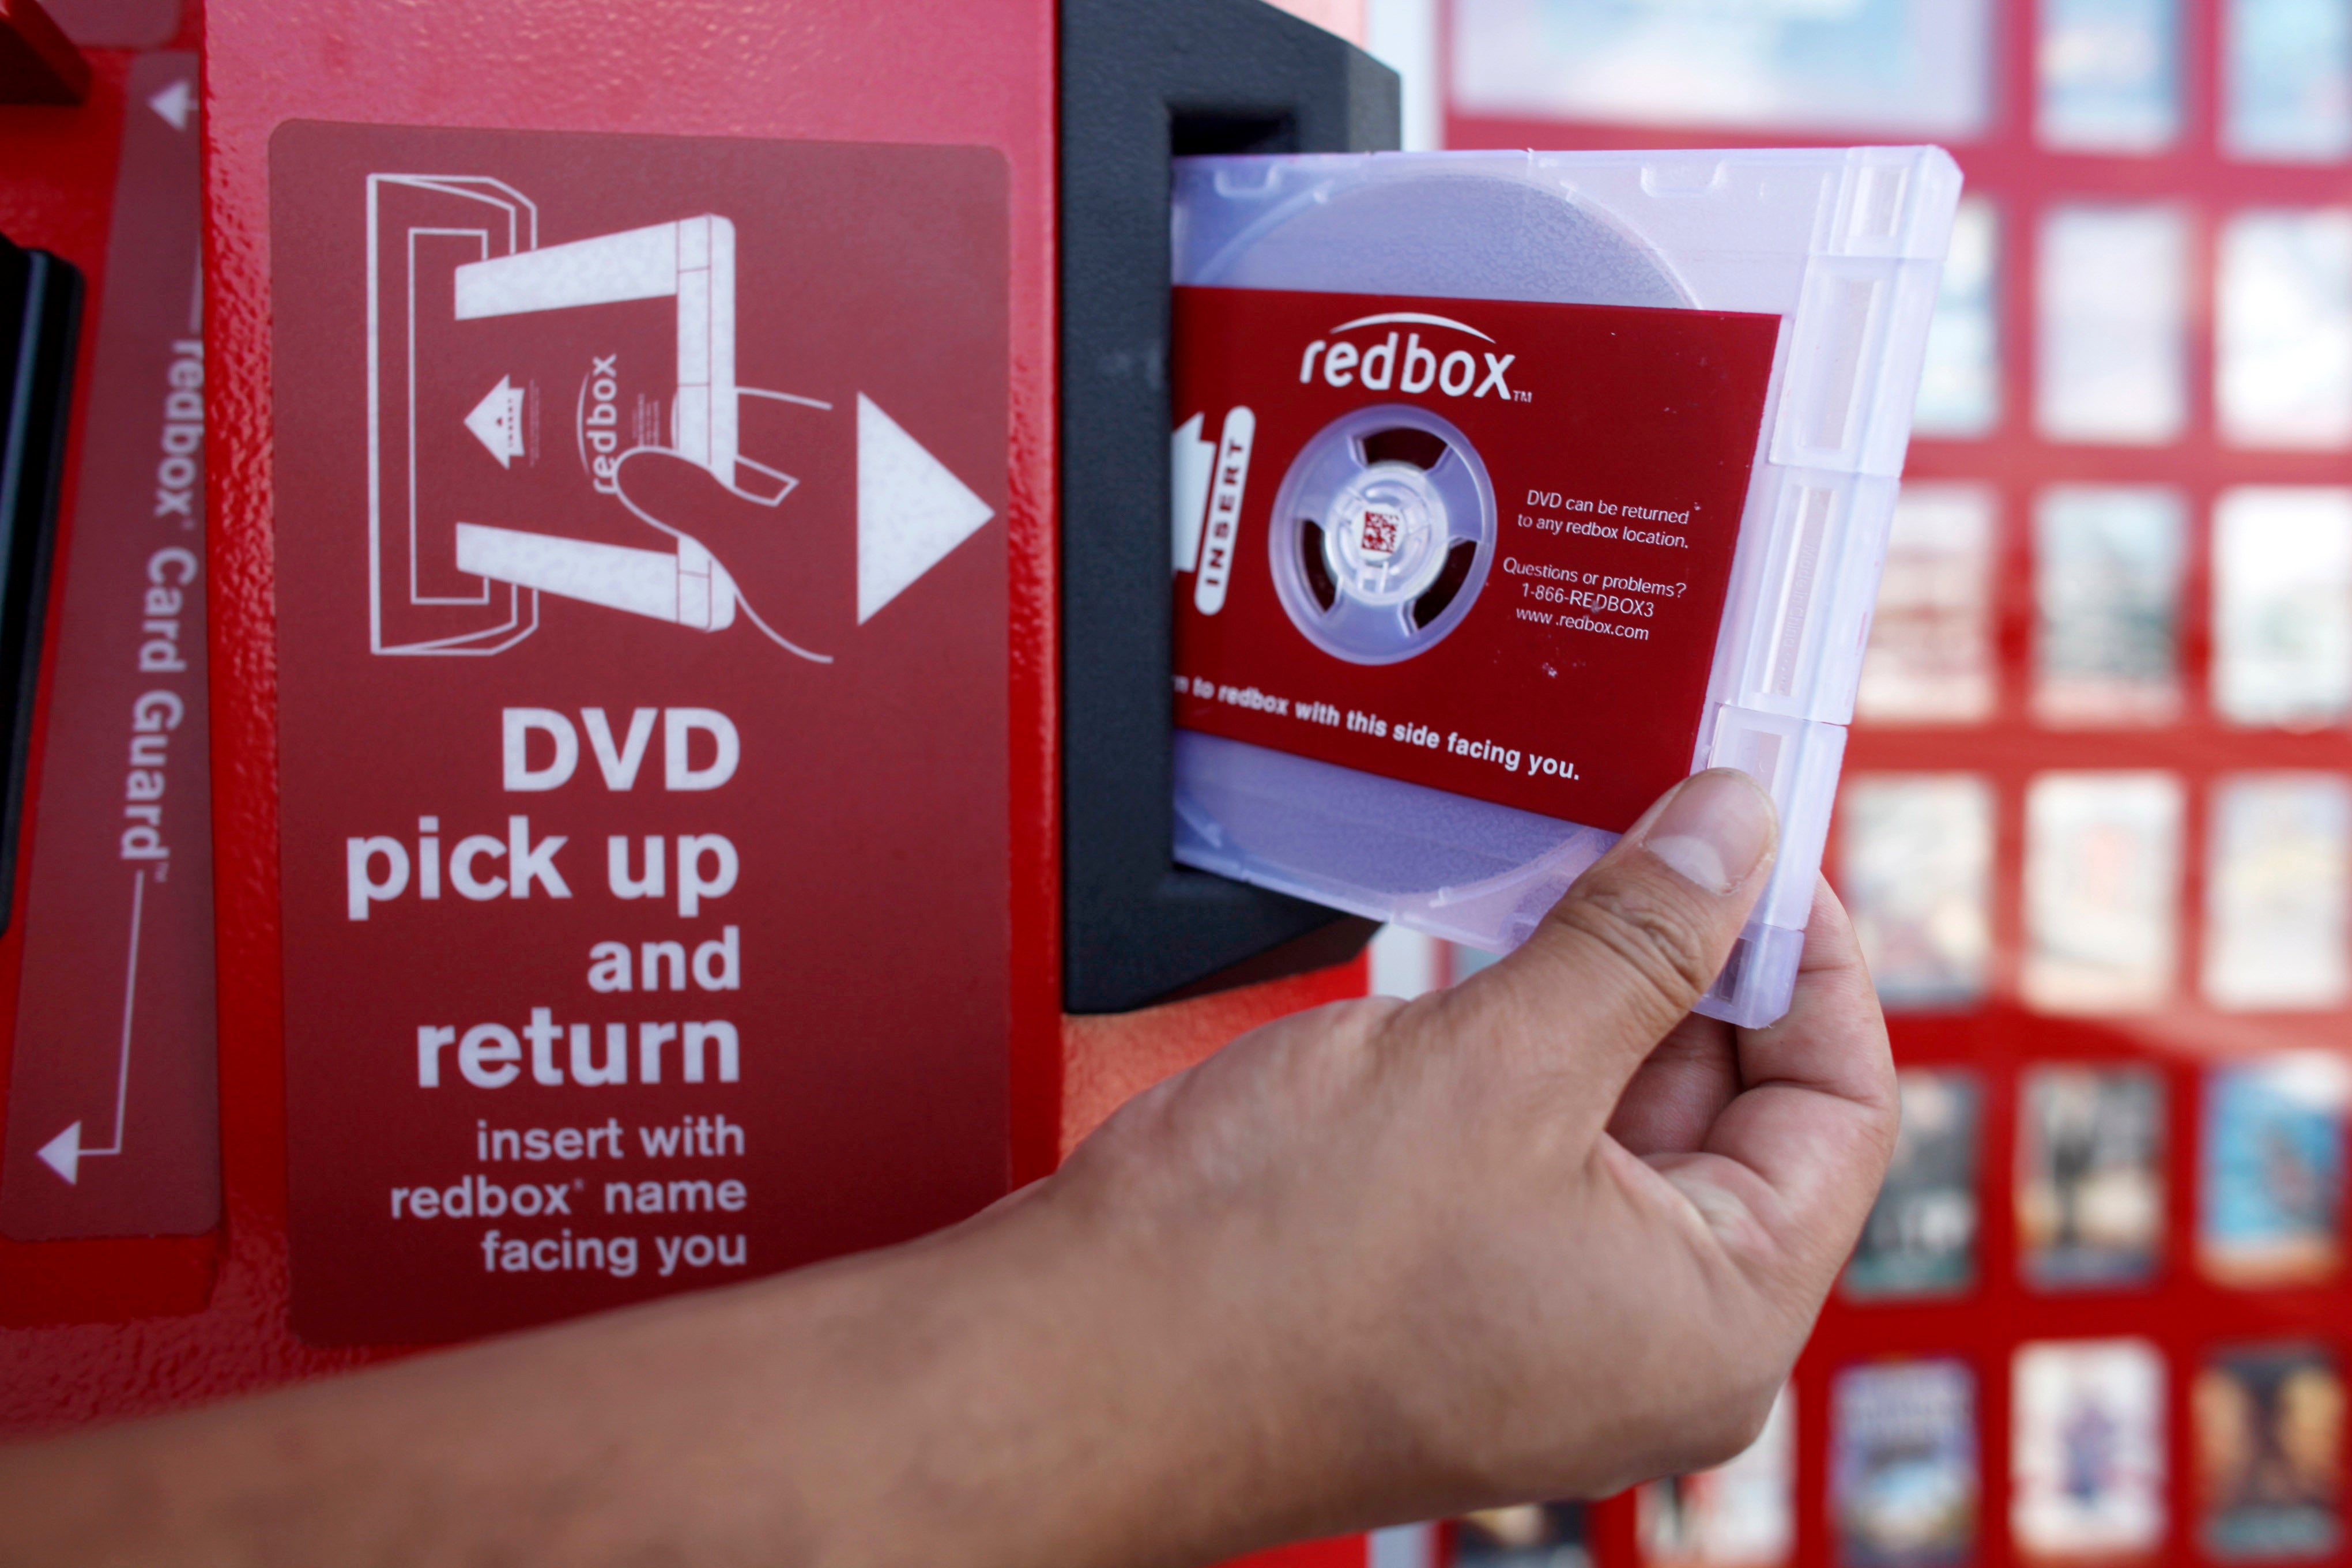 The company behind DVD rental Redbox said it owes money to more than 500 creditors, including Walmart, Walgreens, Warner Bros. home Entertainment and Sony